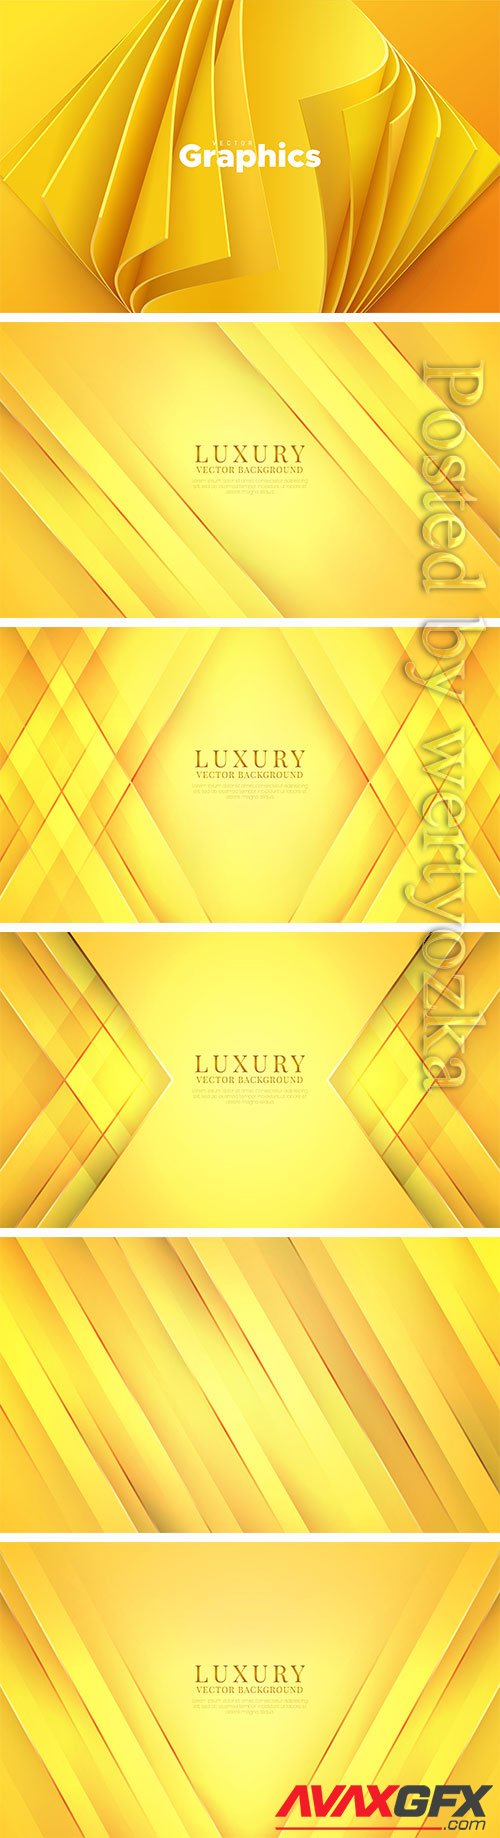 Yellow abstract backgrounds with golden lines in vector